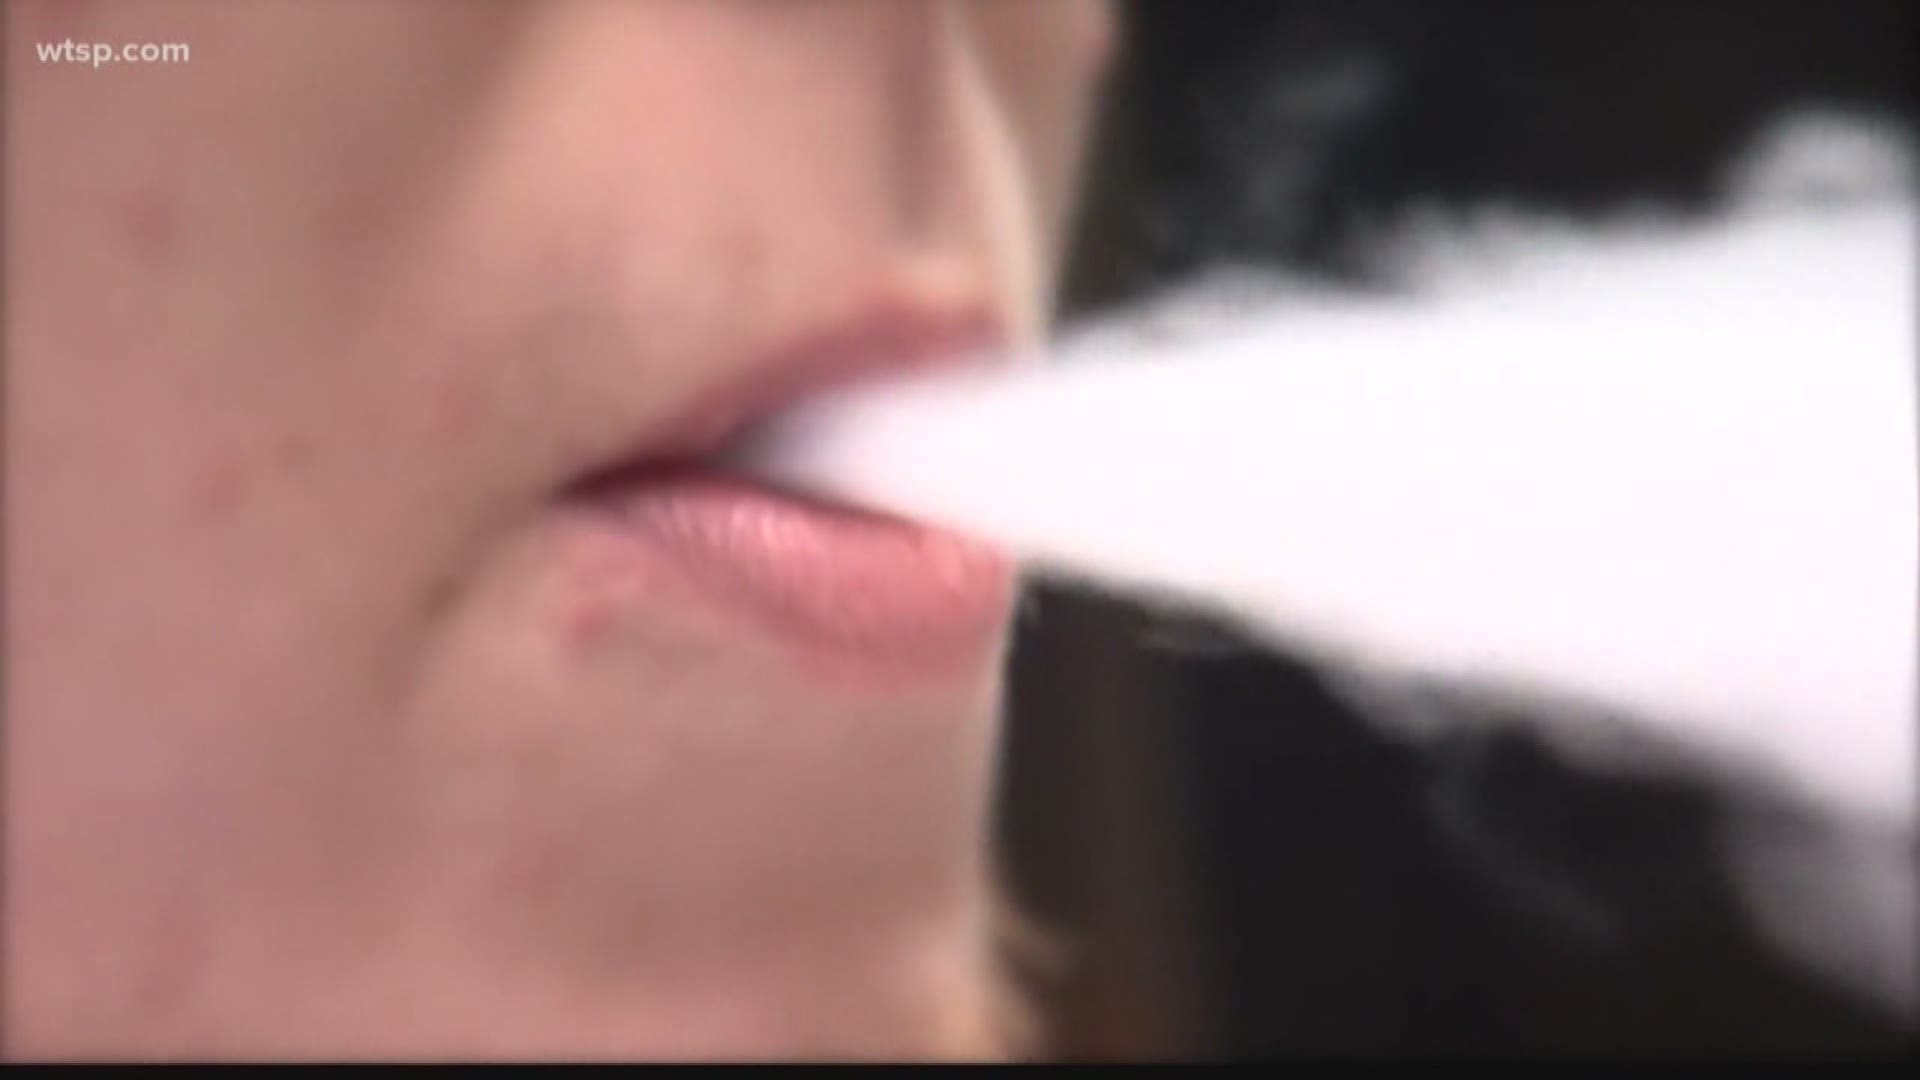 Hillsborough County could be the first county in Florida to adopt vaping age restrictions.